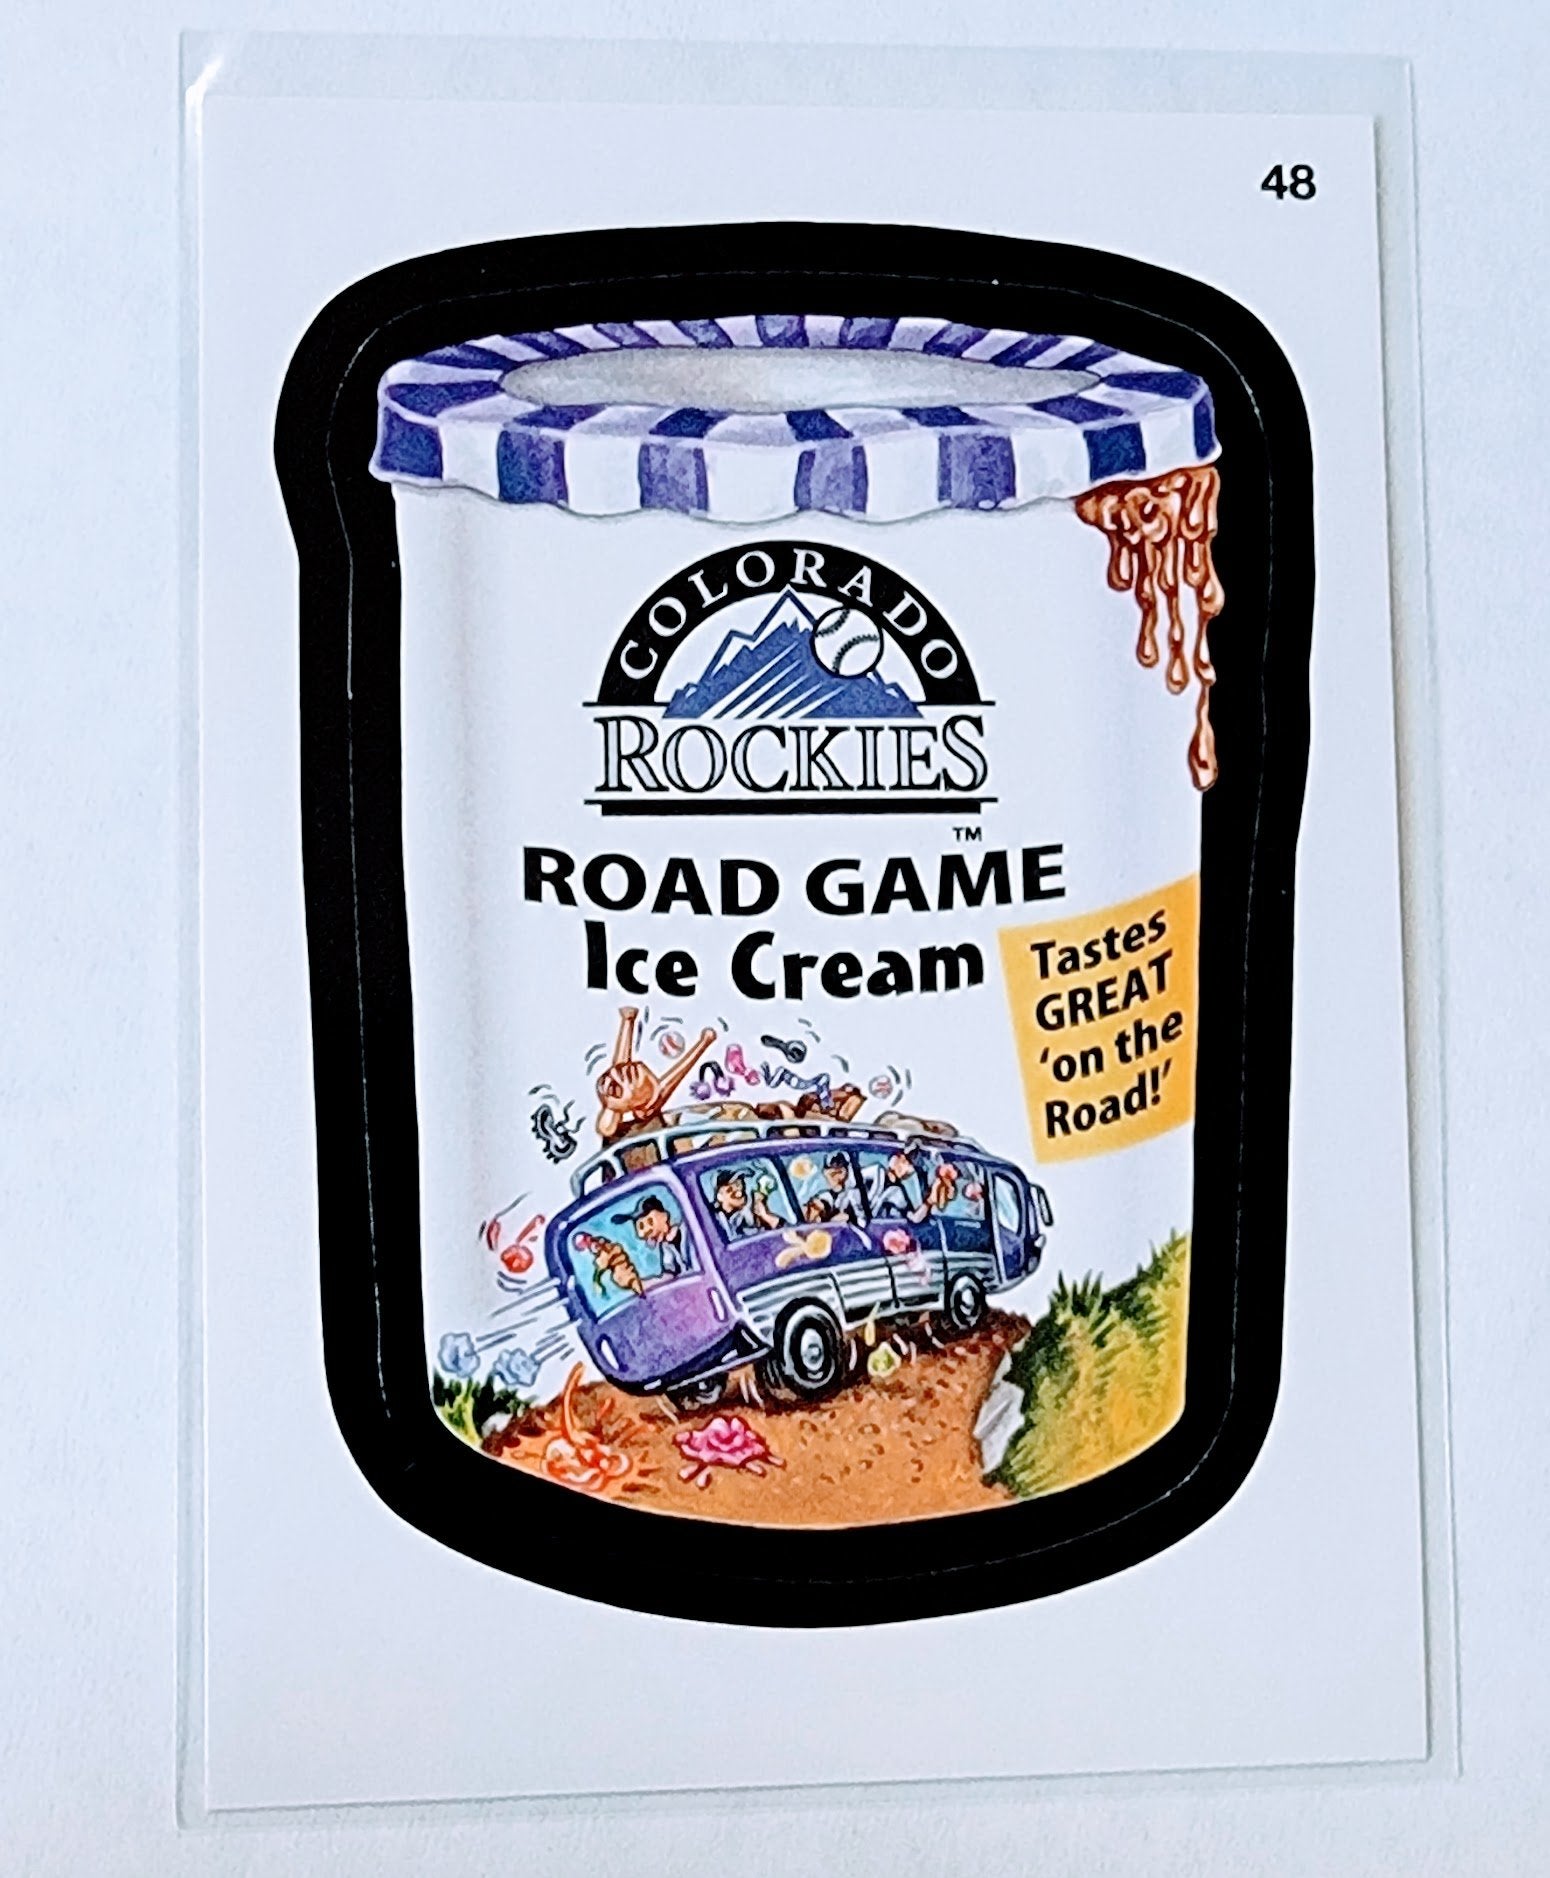 2016 Topps MLB Baseball Wacky Packages Colorado Rockies Road Game Ice Cream Sticker Trading Card MCSC1 simple Xclusive Collectibles   